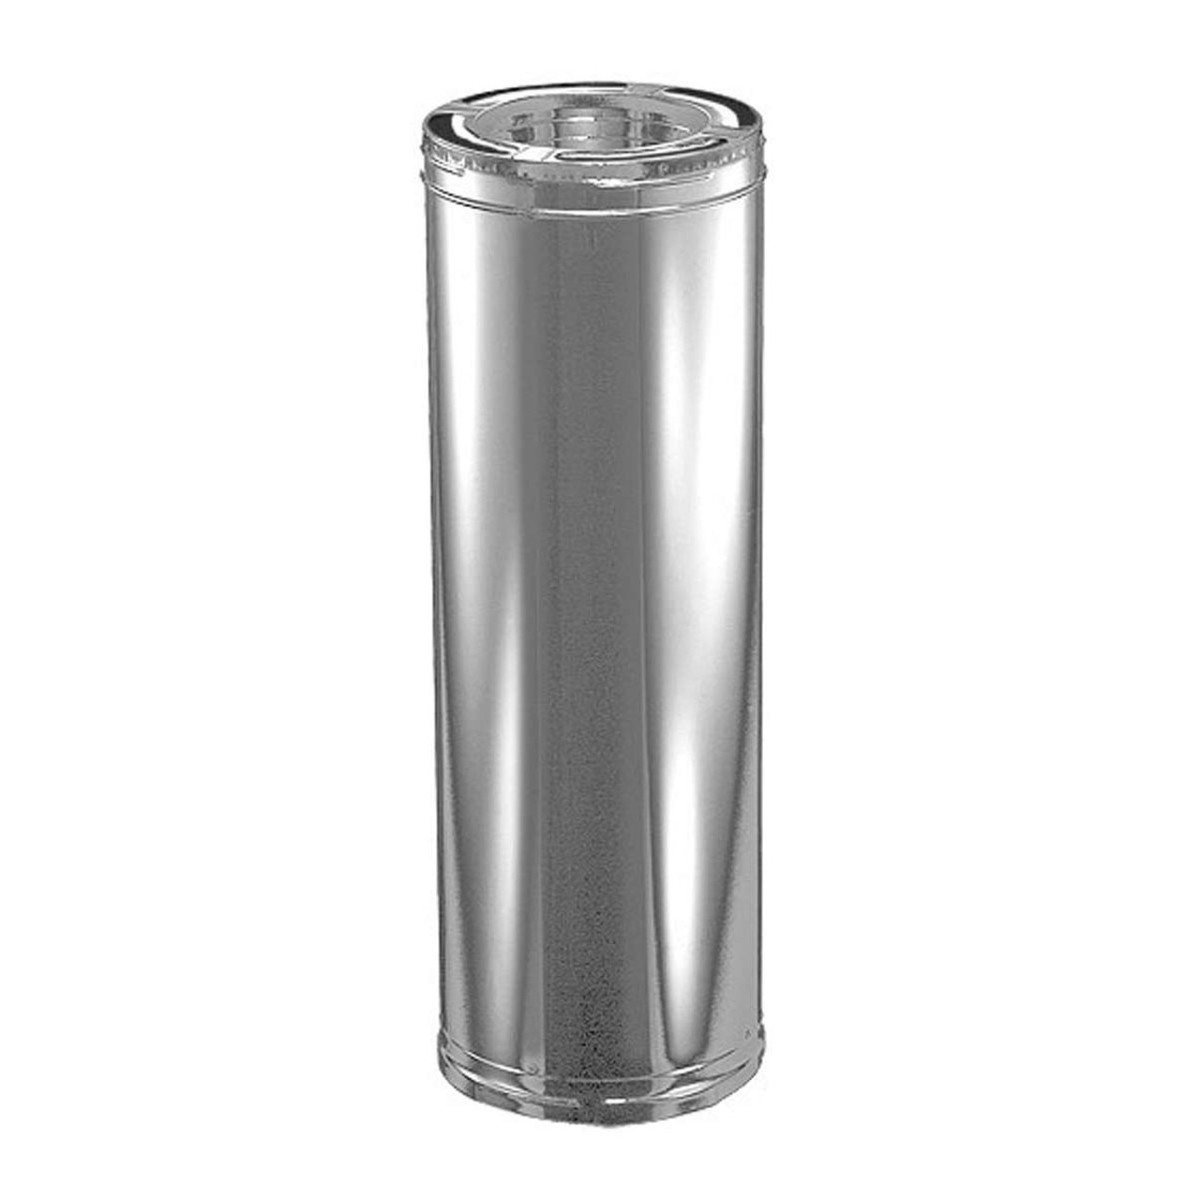 7 x 36 DuraPlus Stainless Steel Chimney Pipe - 7DP-36SS